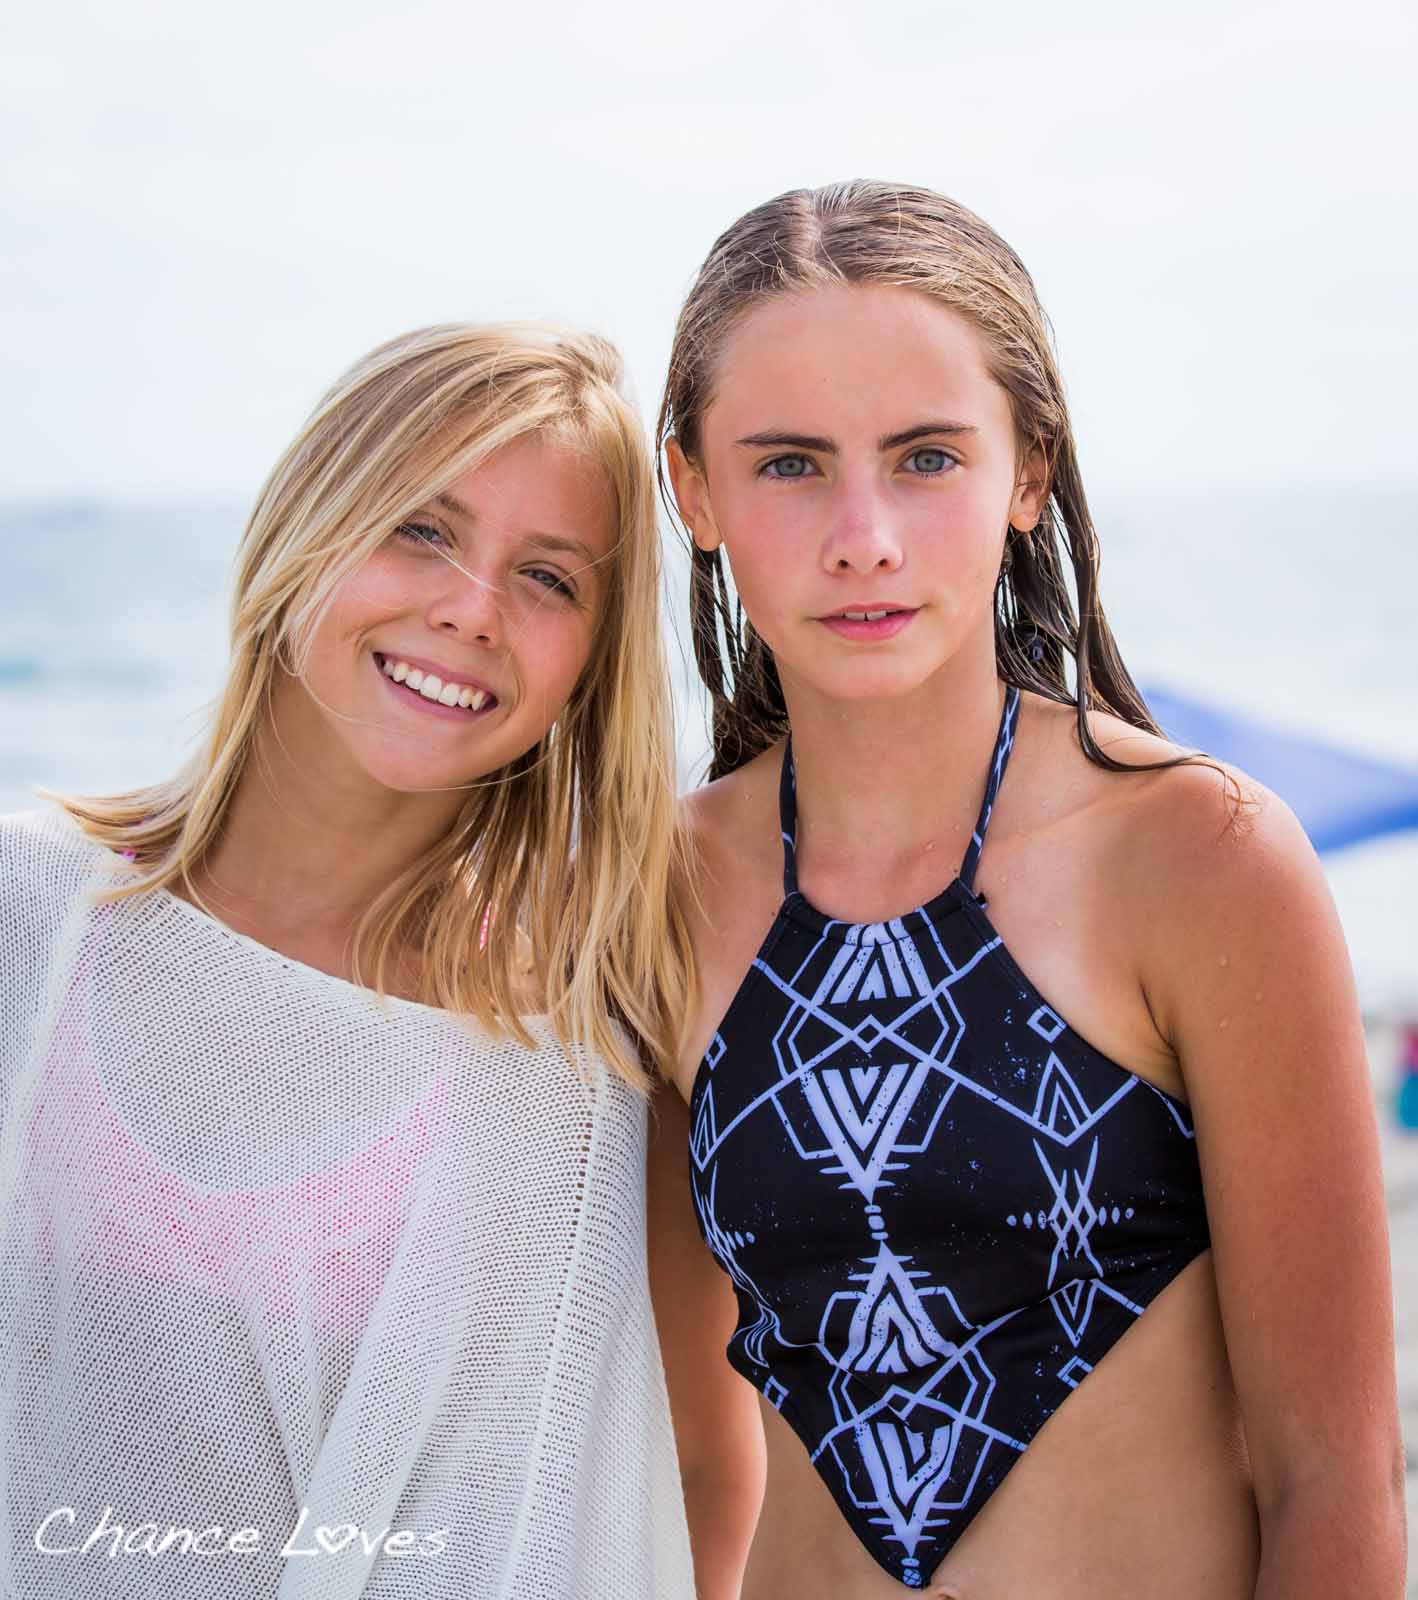 Chance Colette the young designer behind the swimsuit brand Chance Loves with one of her friends